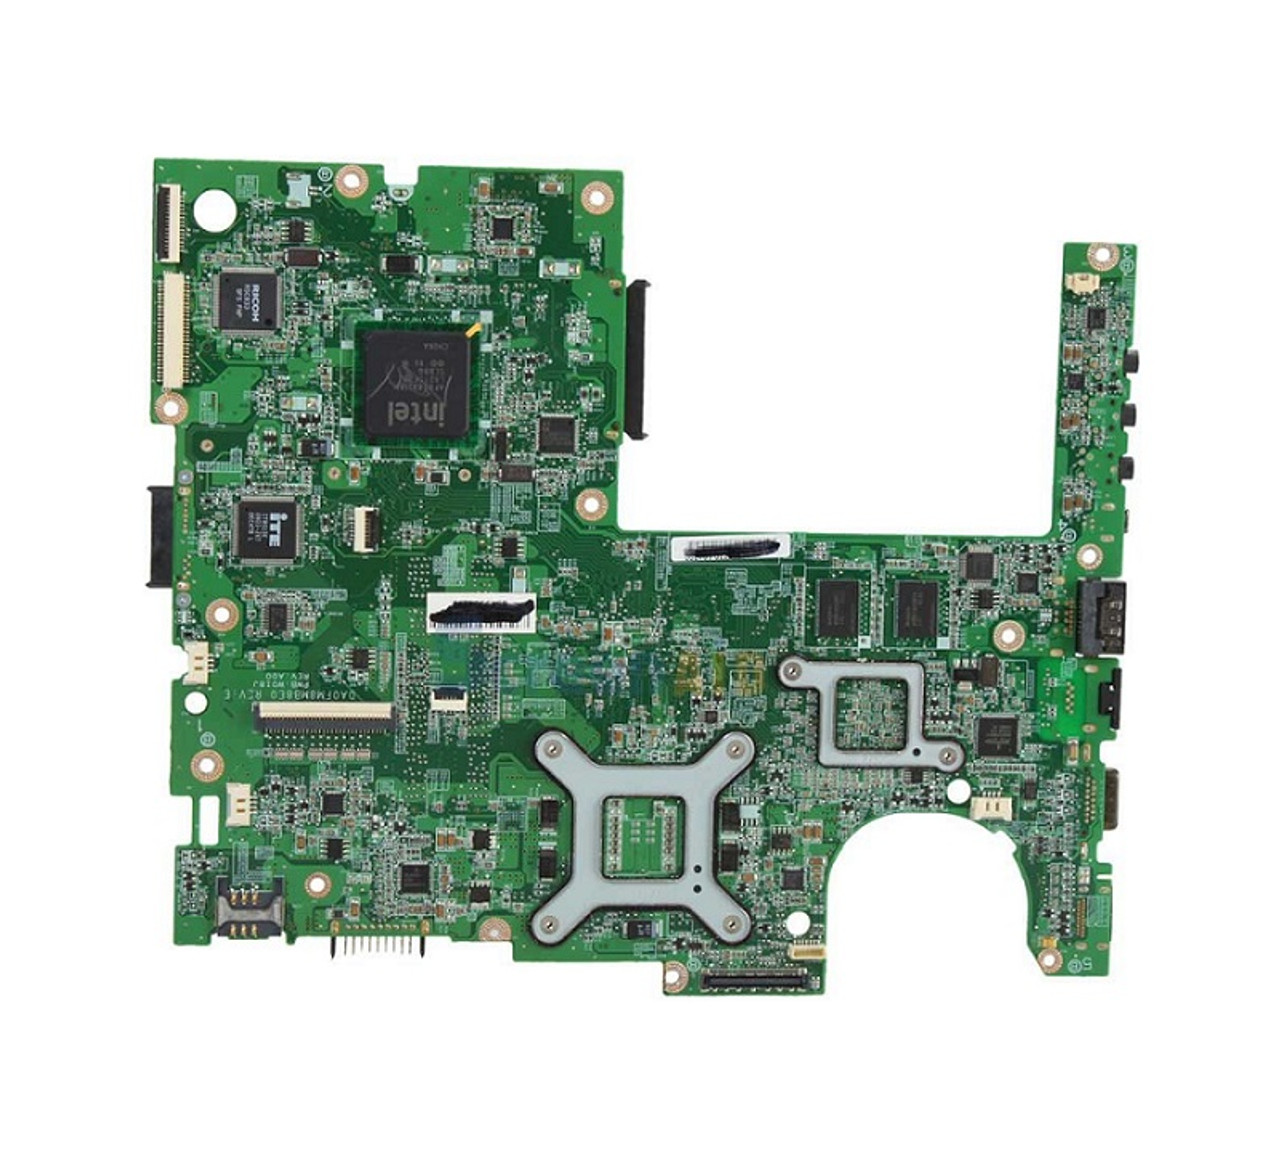 60-N0OMB1900-B02 - Asus X55cr Intel Laptop Motheboard with I3-2370m 2.4GHz Cpu